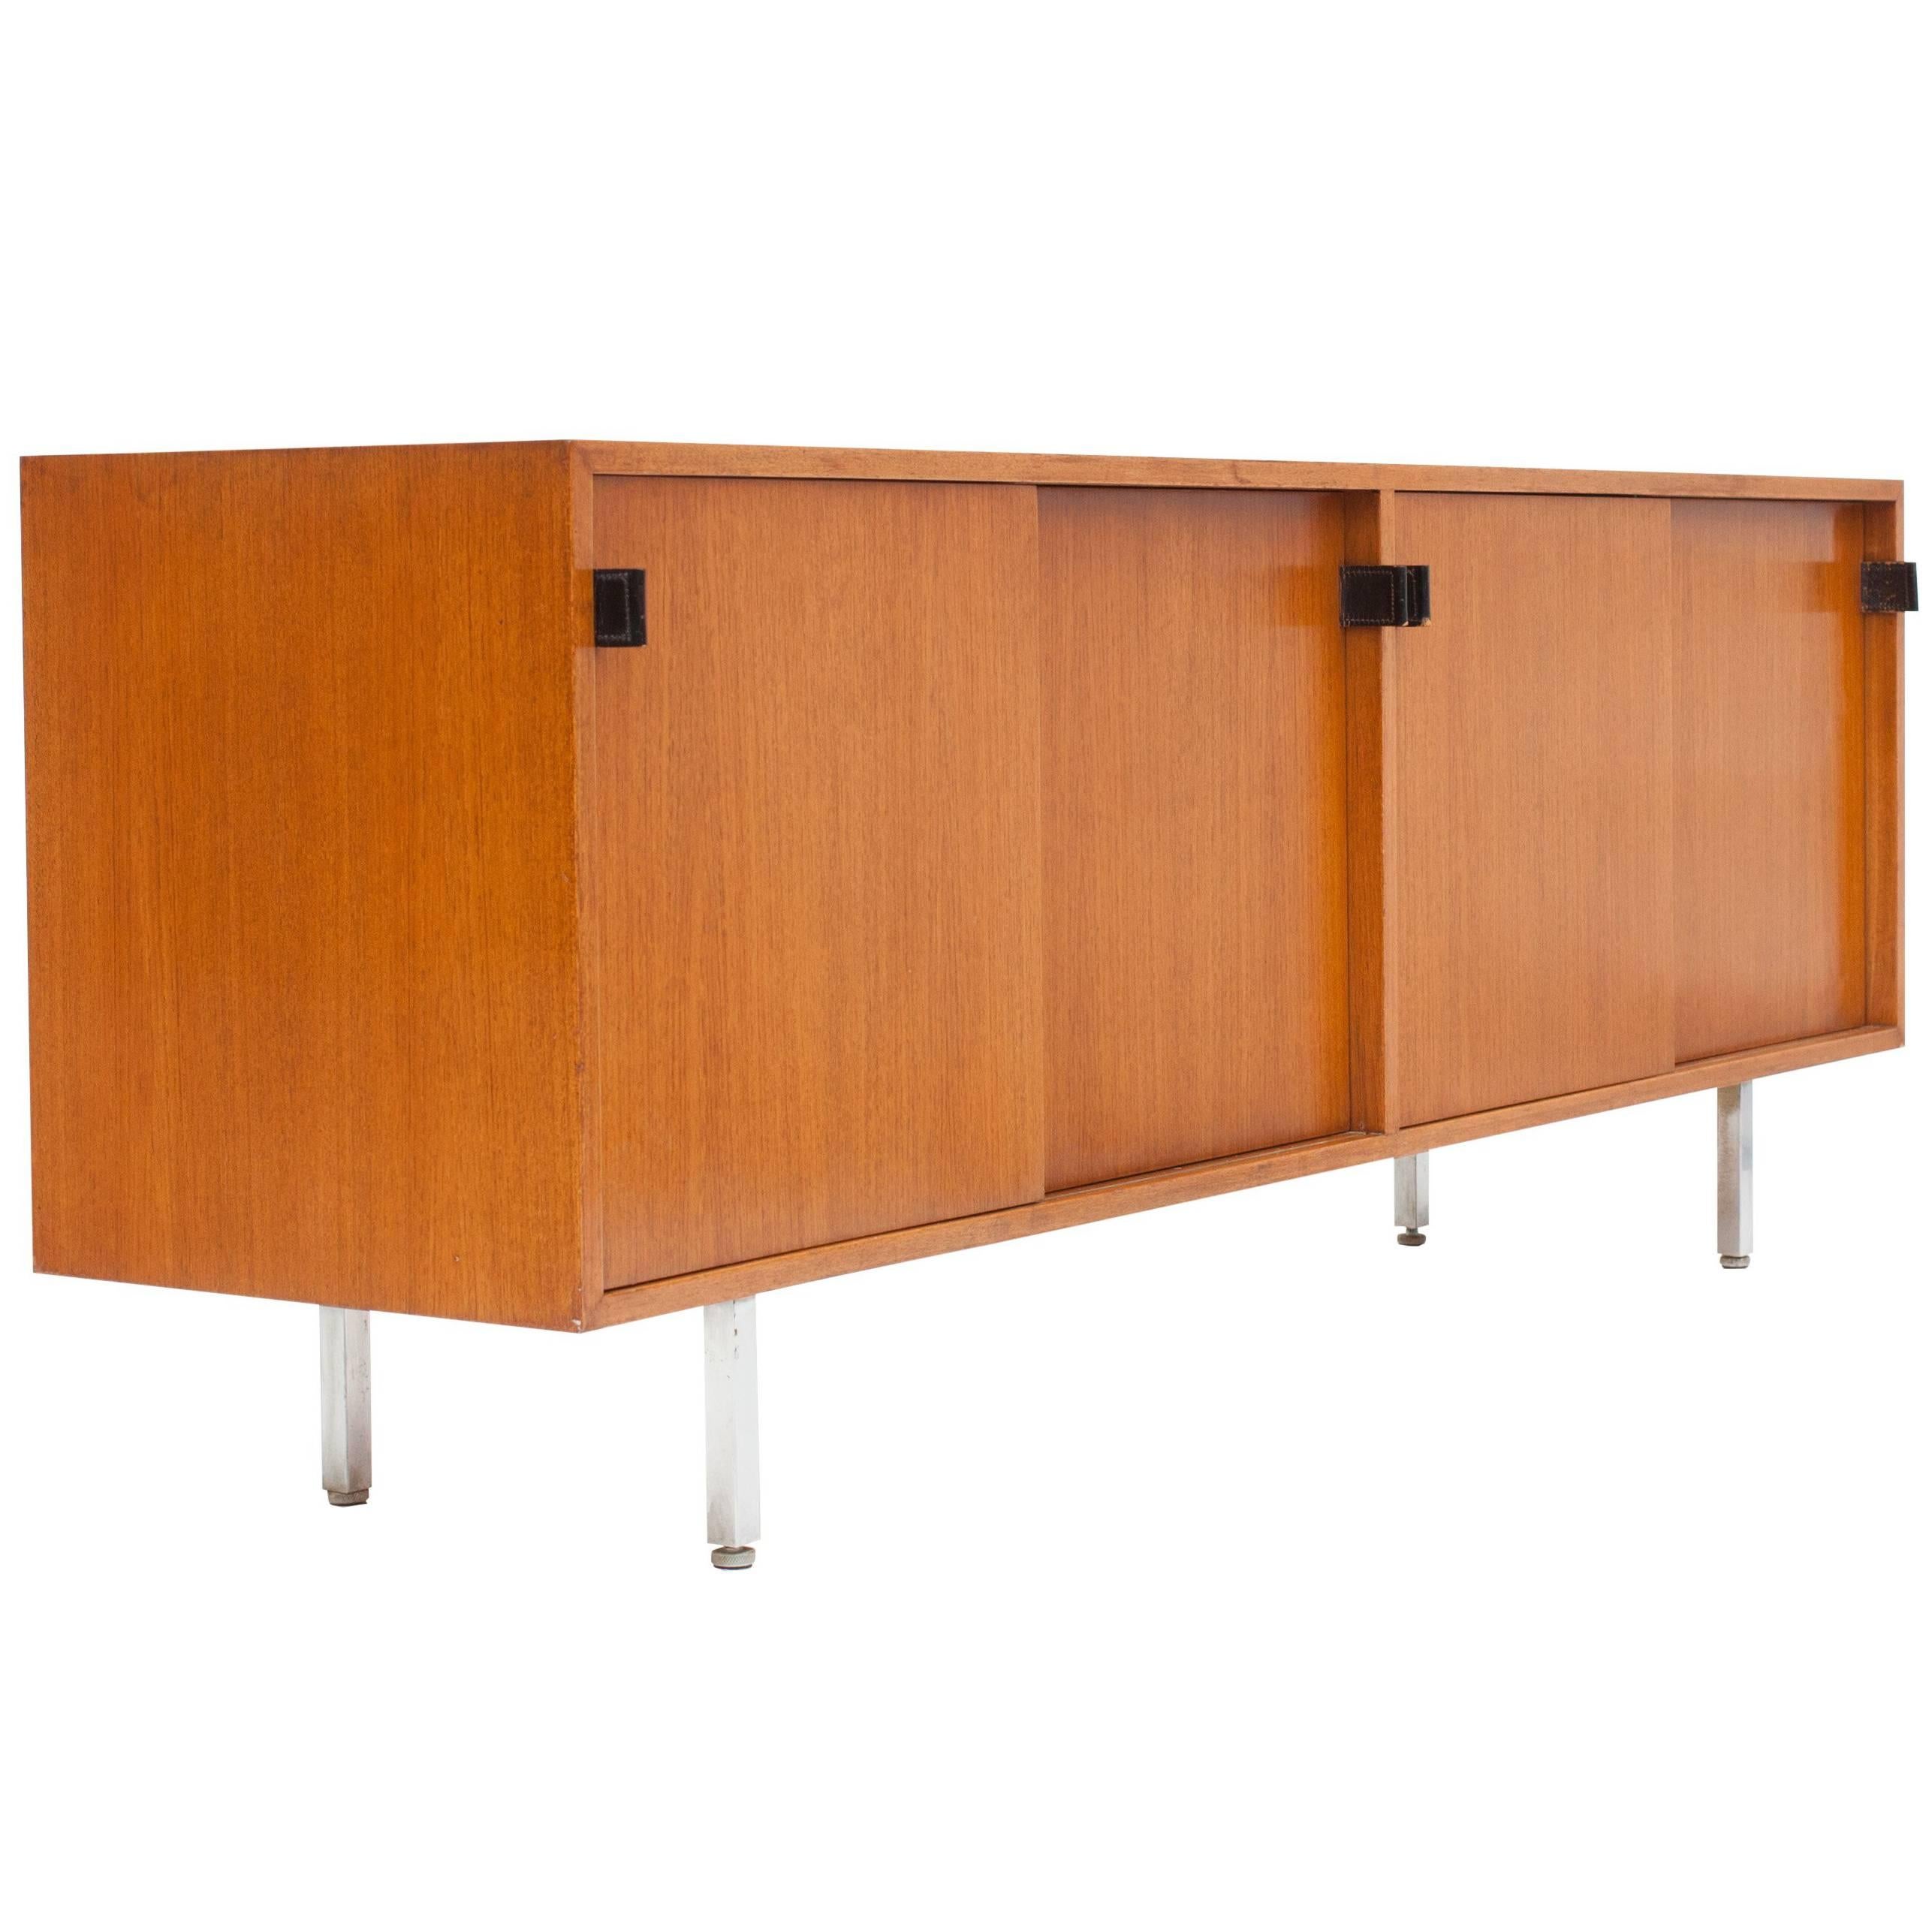 American Florence Knoll Credenza in Teak , Manufactured by De Coene, 1950s